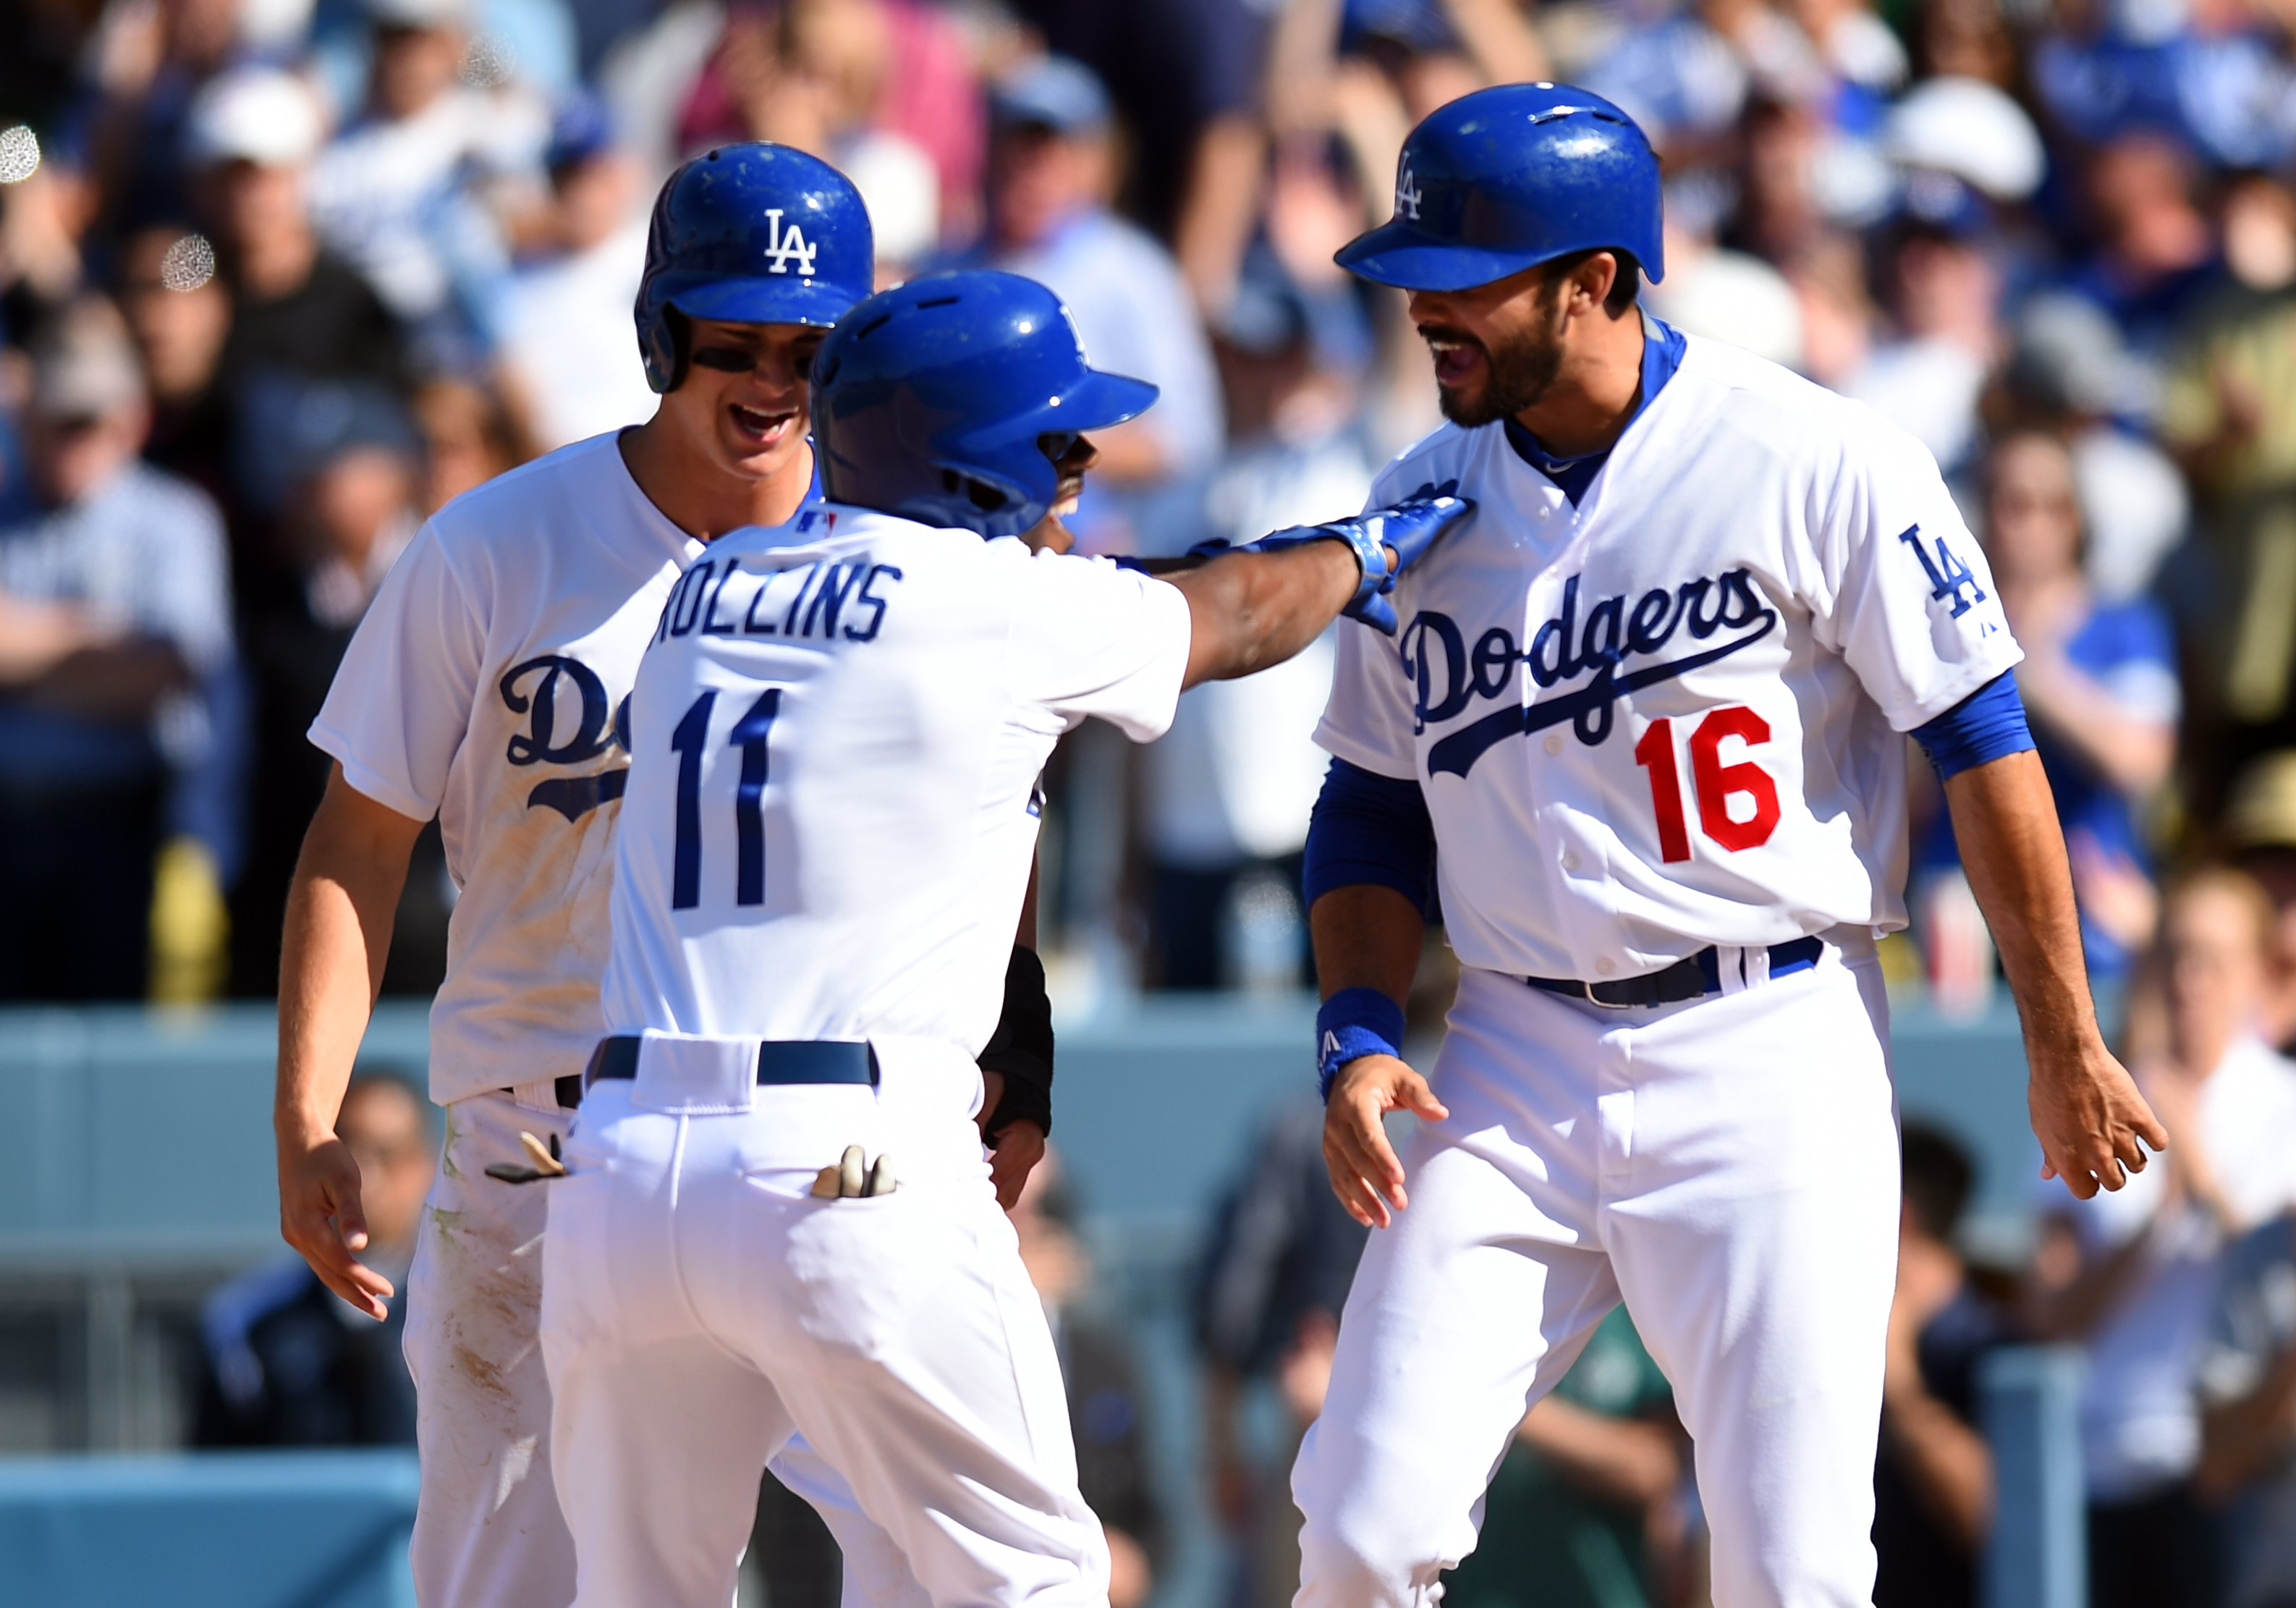 Dodgers Opening Day The Best Photos in Team History NBC Los Angeles